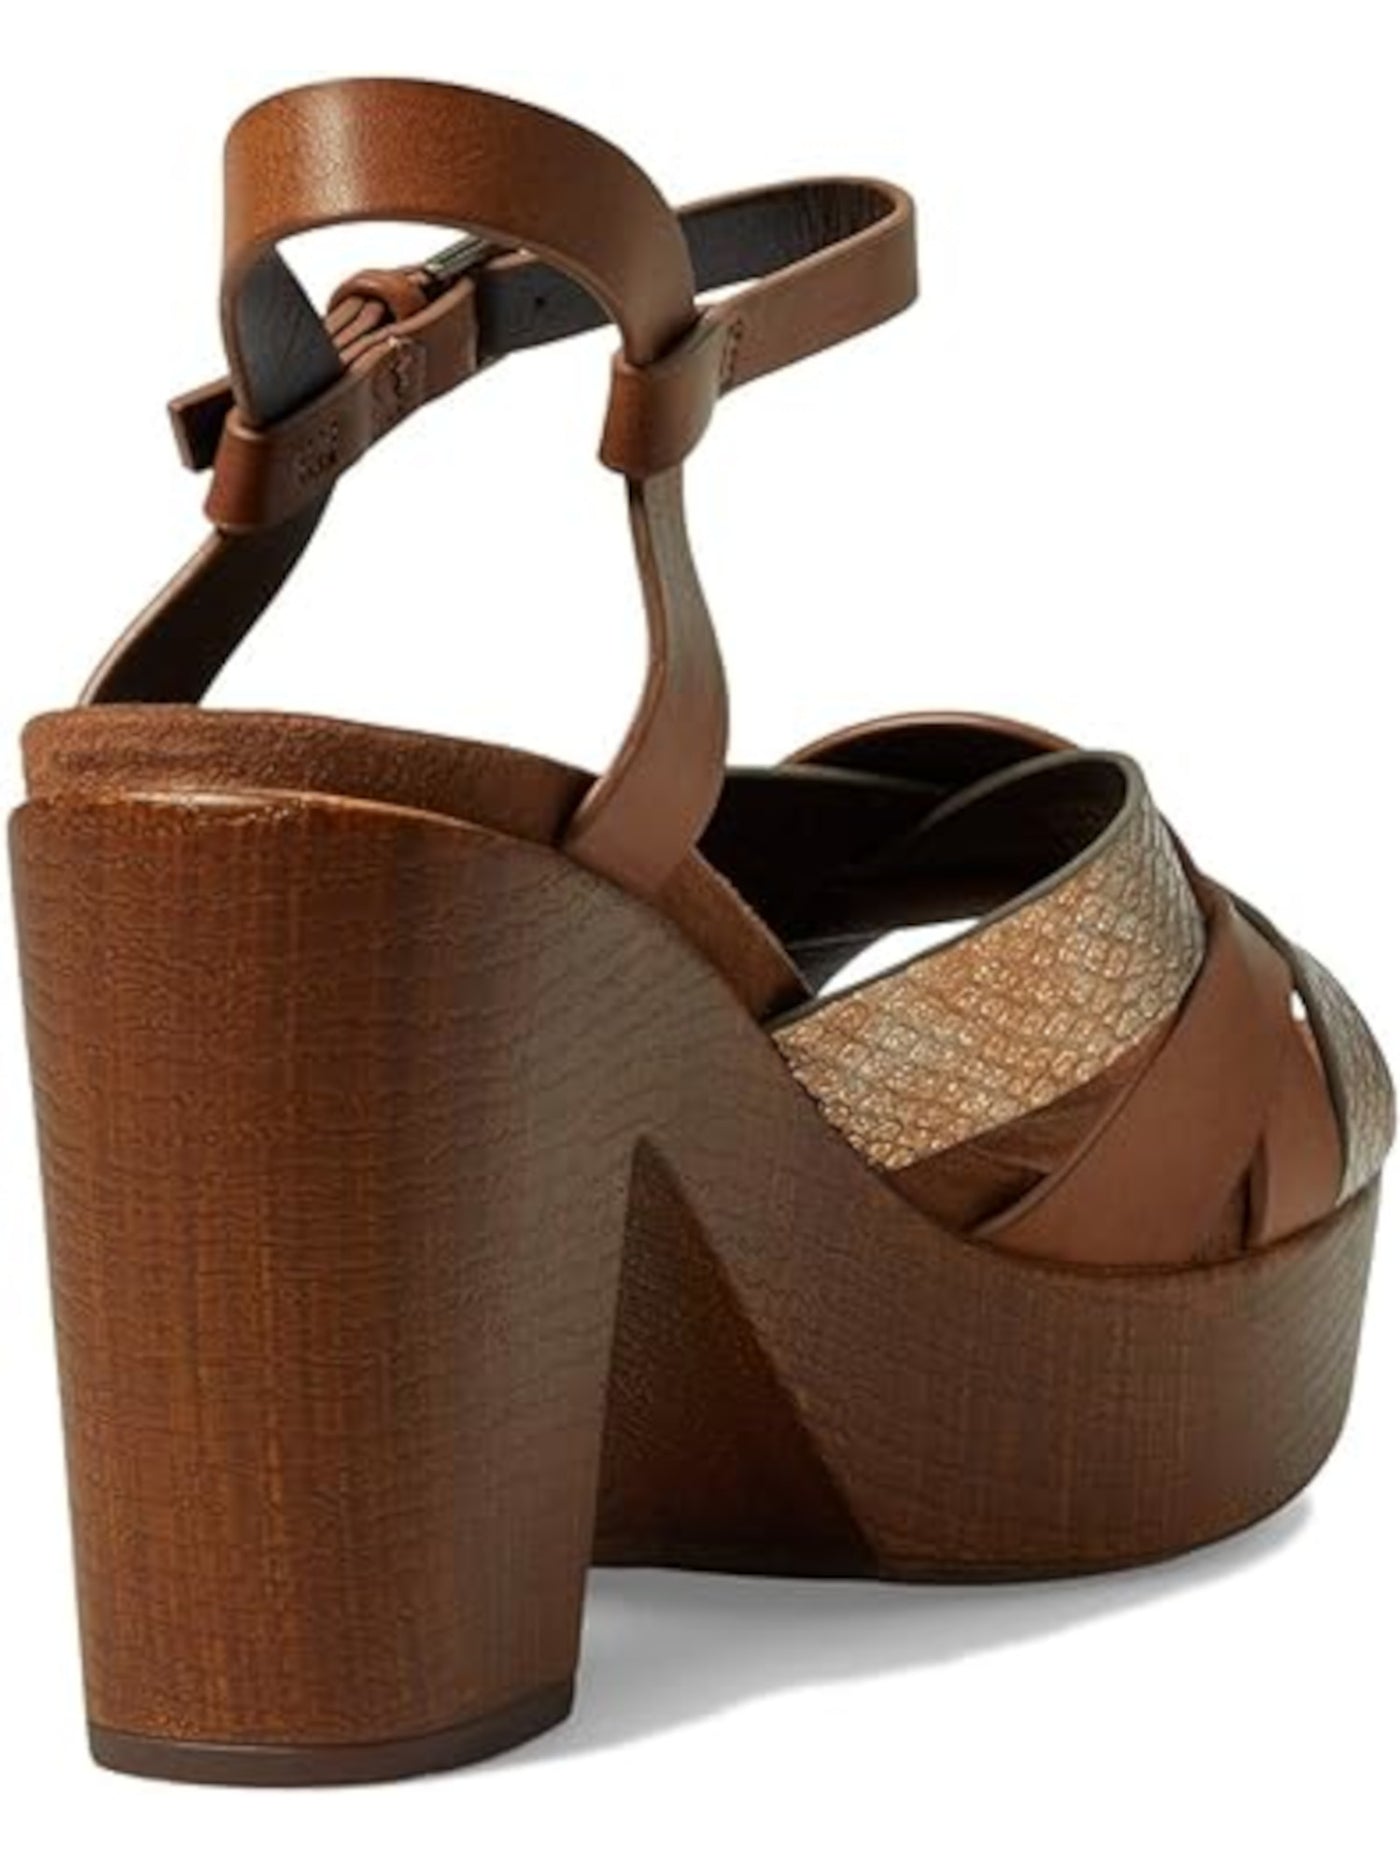 WHITE MOUNTAIN FOOTBEDS Womens Brown Mixed Media 1-1/2" Faux-Wood Platform Ankle Strap Padded Achiever Open Toe Block Heel Buckle Dress Heeled Sandal 10 M